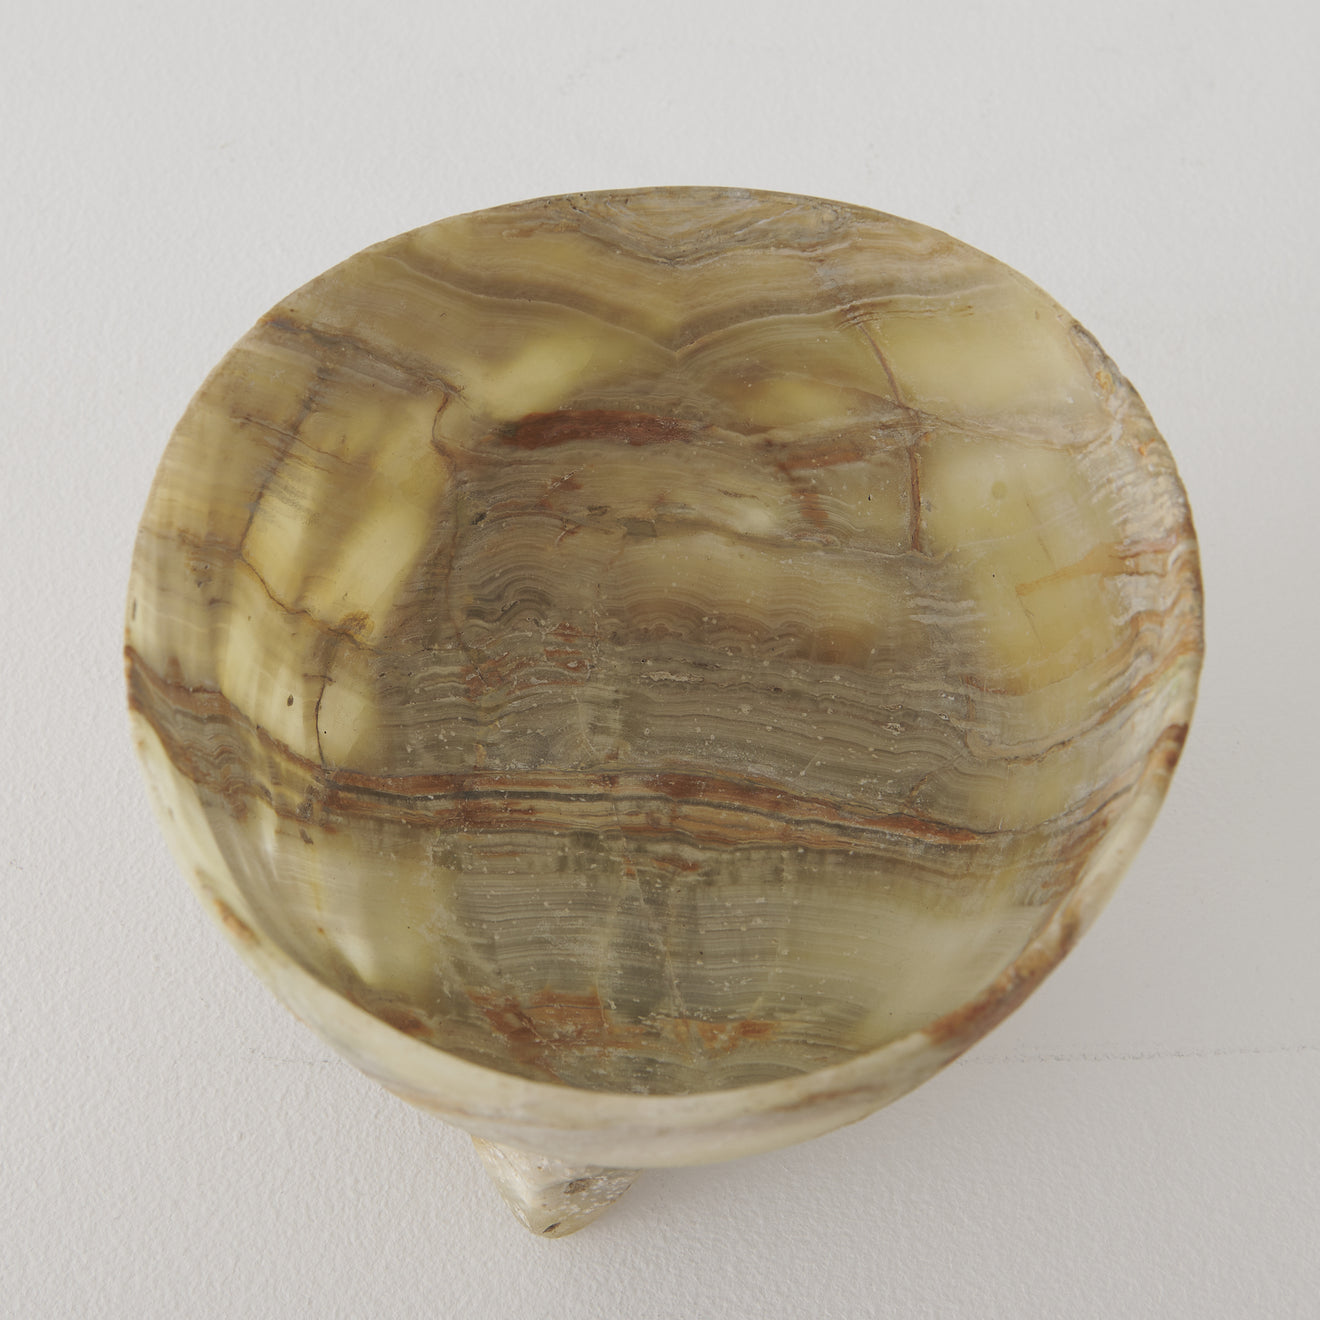 PRE-COLUMBIAN AGATE BOWL WITH ZOOMORPHIC LEGS